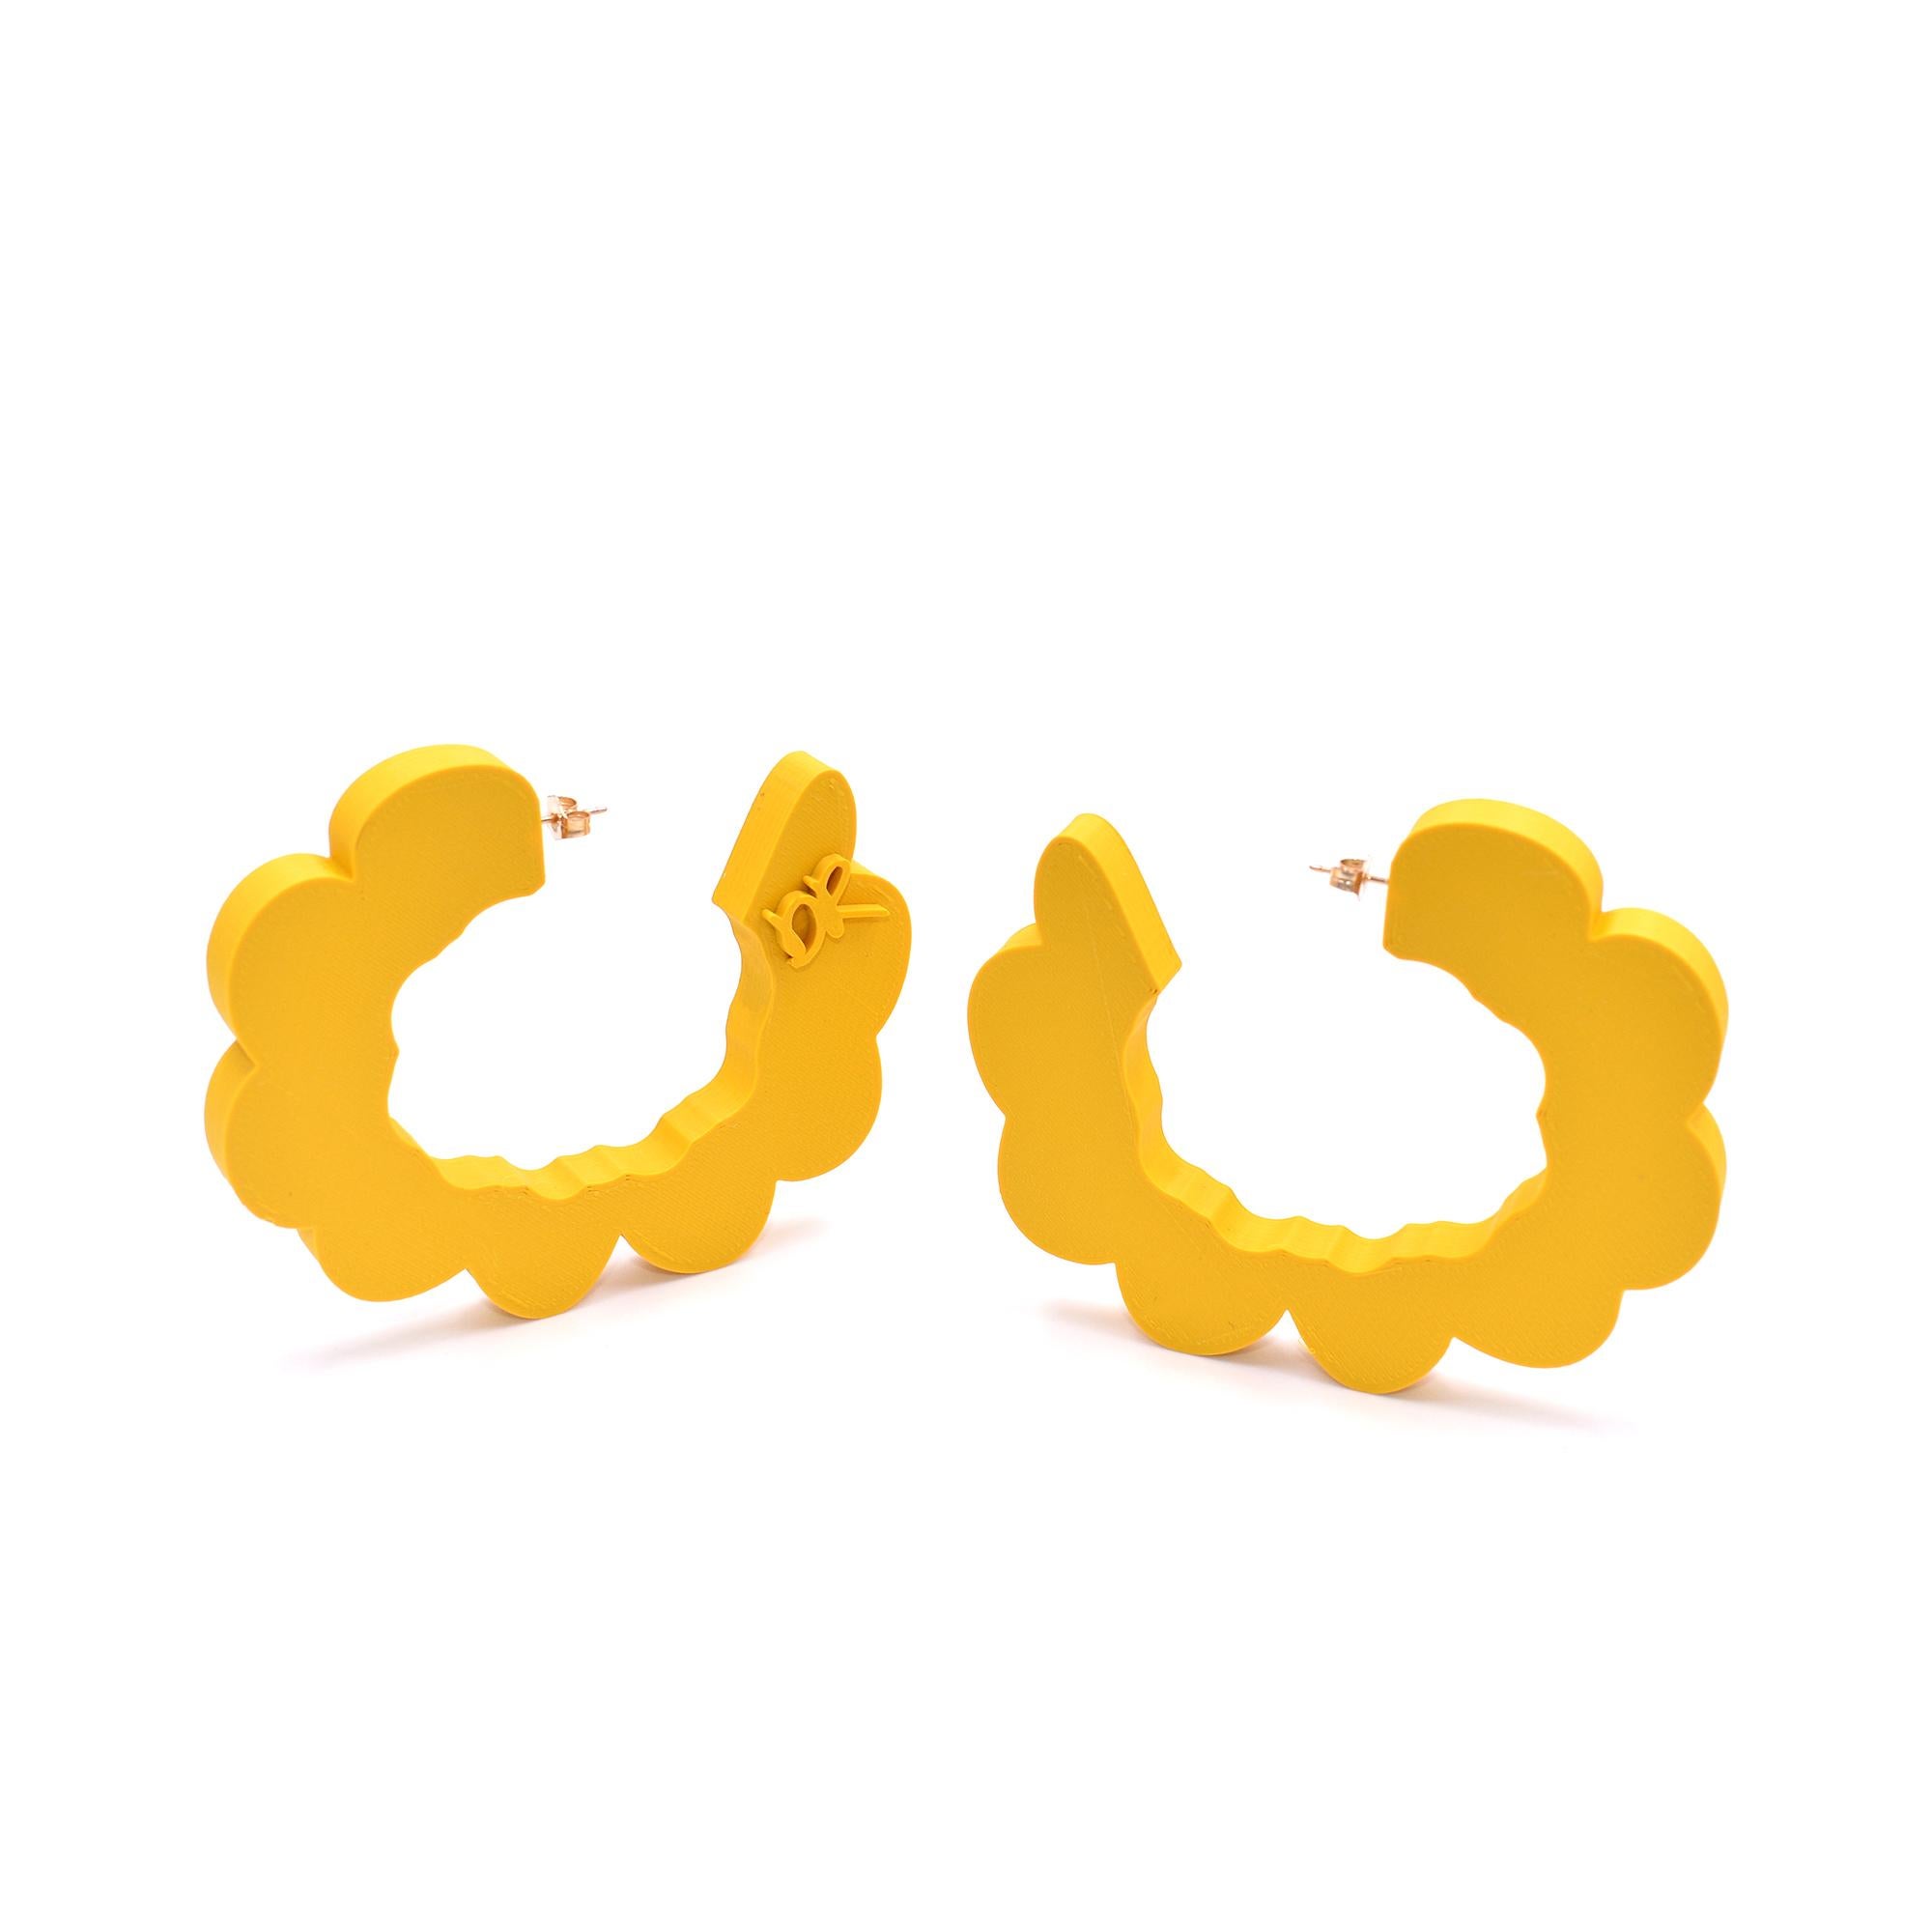 Can we pretend? These cloud shaped hoop earrings are 3d printed with premium PLA plastic
and finished with branded hypoallergenic gold plated posts. Matte, leather like finish. Very lightweight and super easy to style!

As seen on Megan Mckenna and